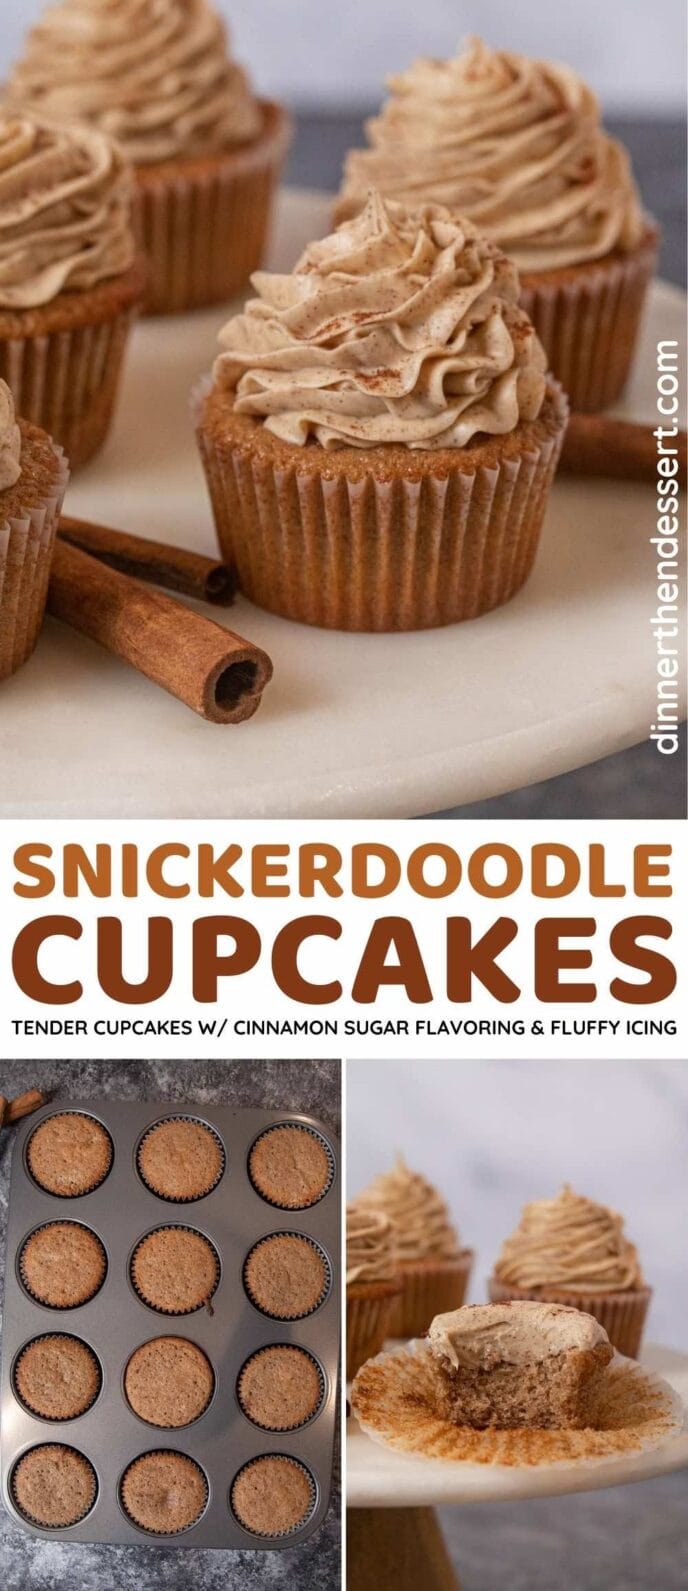 Snickerdoodle Cupcakes collage